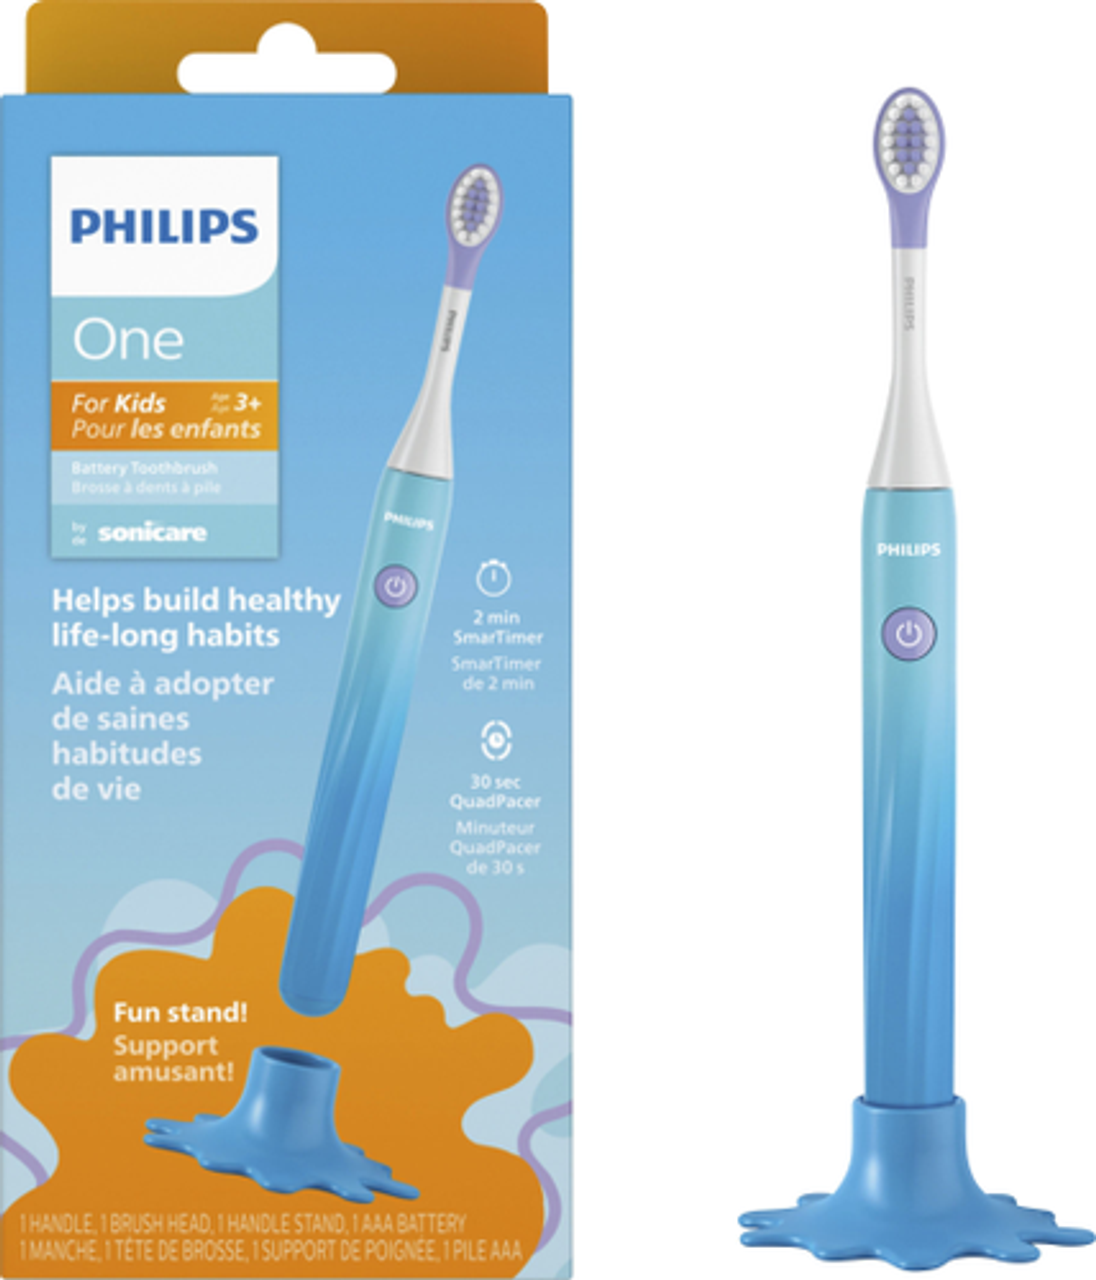 Philips One for Kids Battery Toothbrush - Gradient Blue Fade